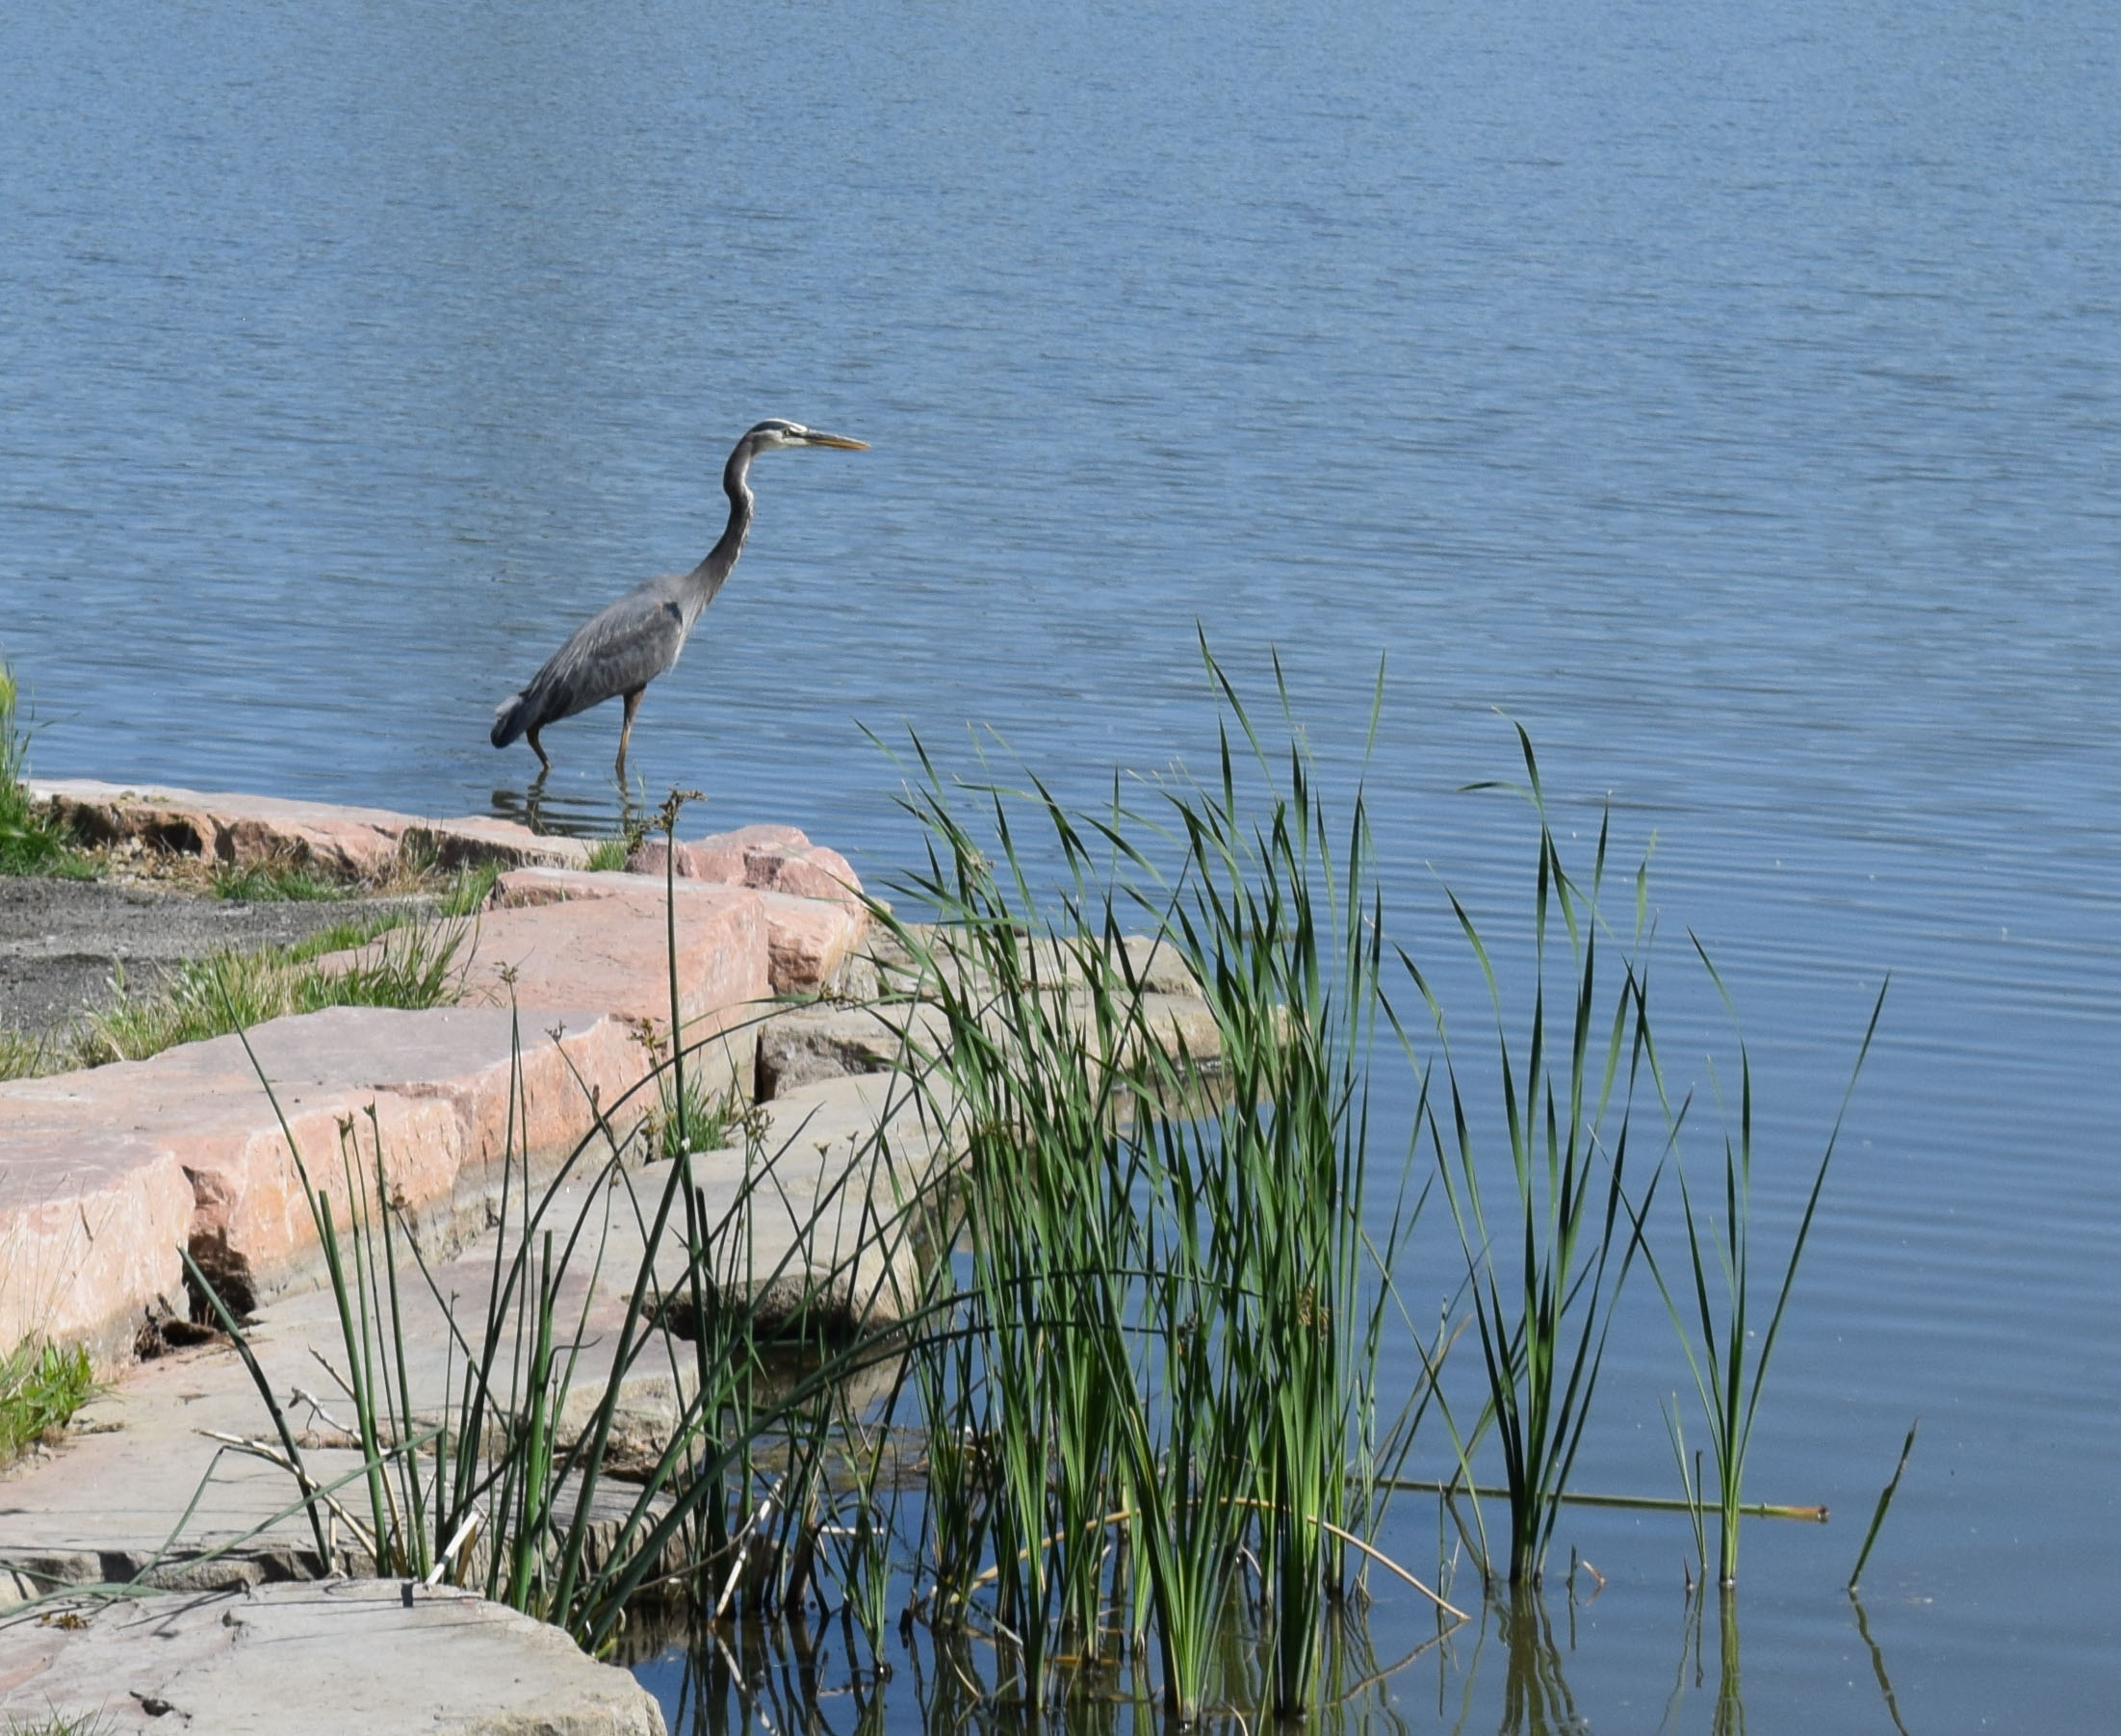 A blue heron enjoys the waters of the South Platte River near Metro Water Recovery’s treatment facility.